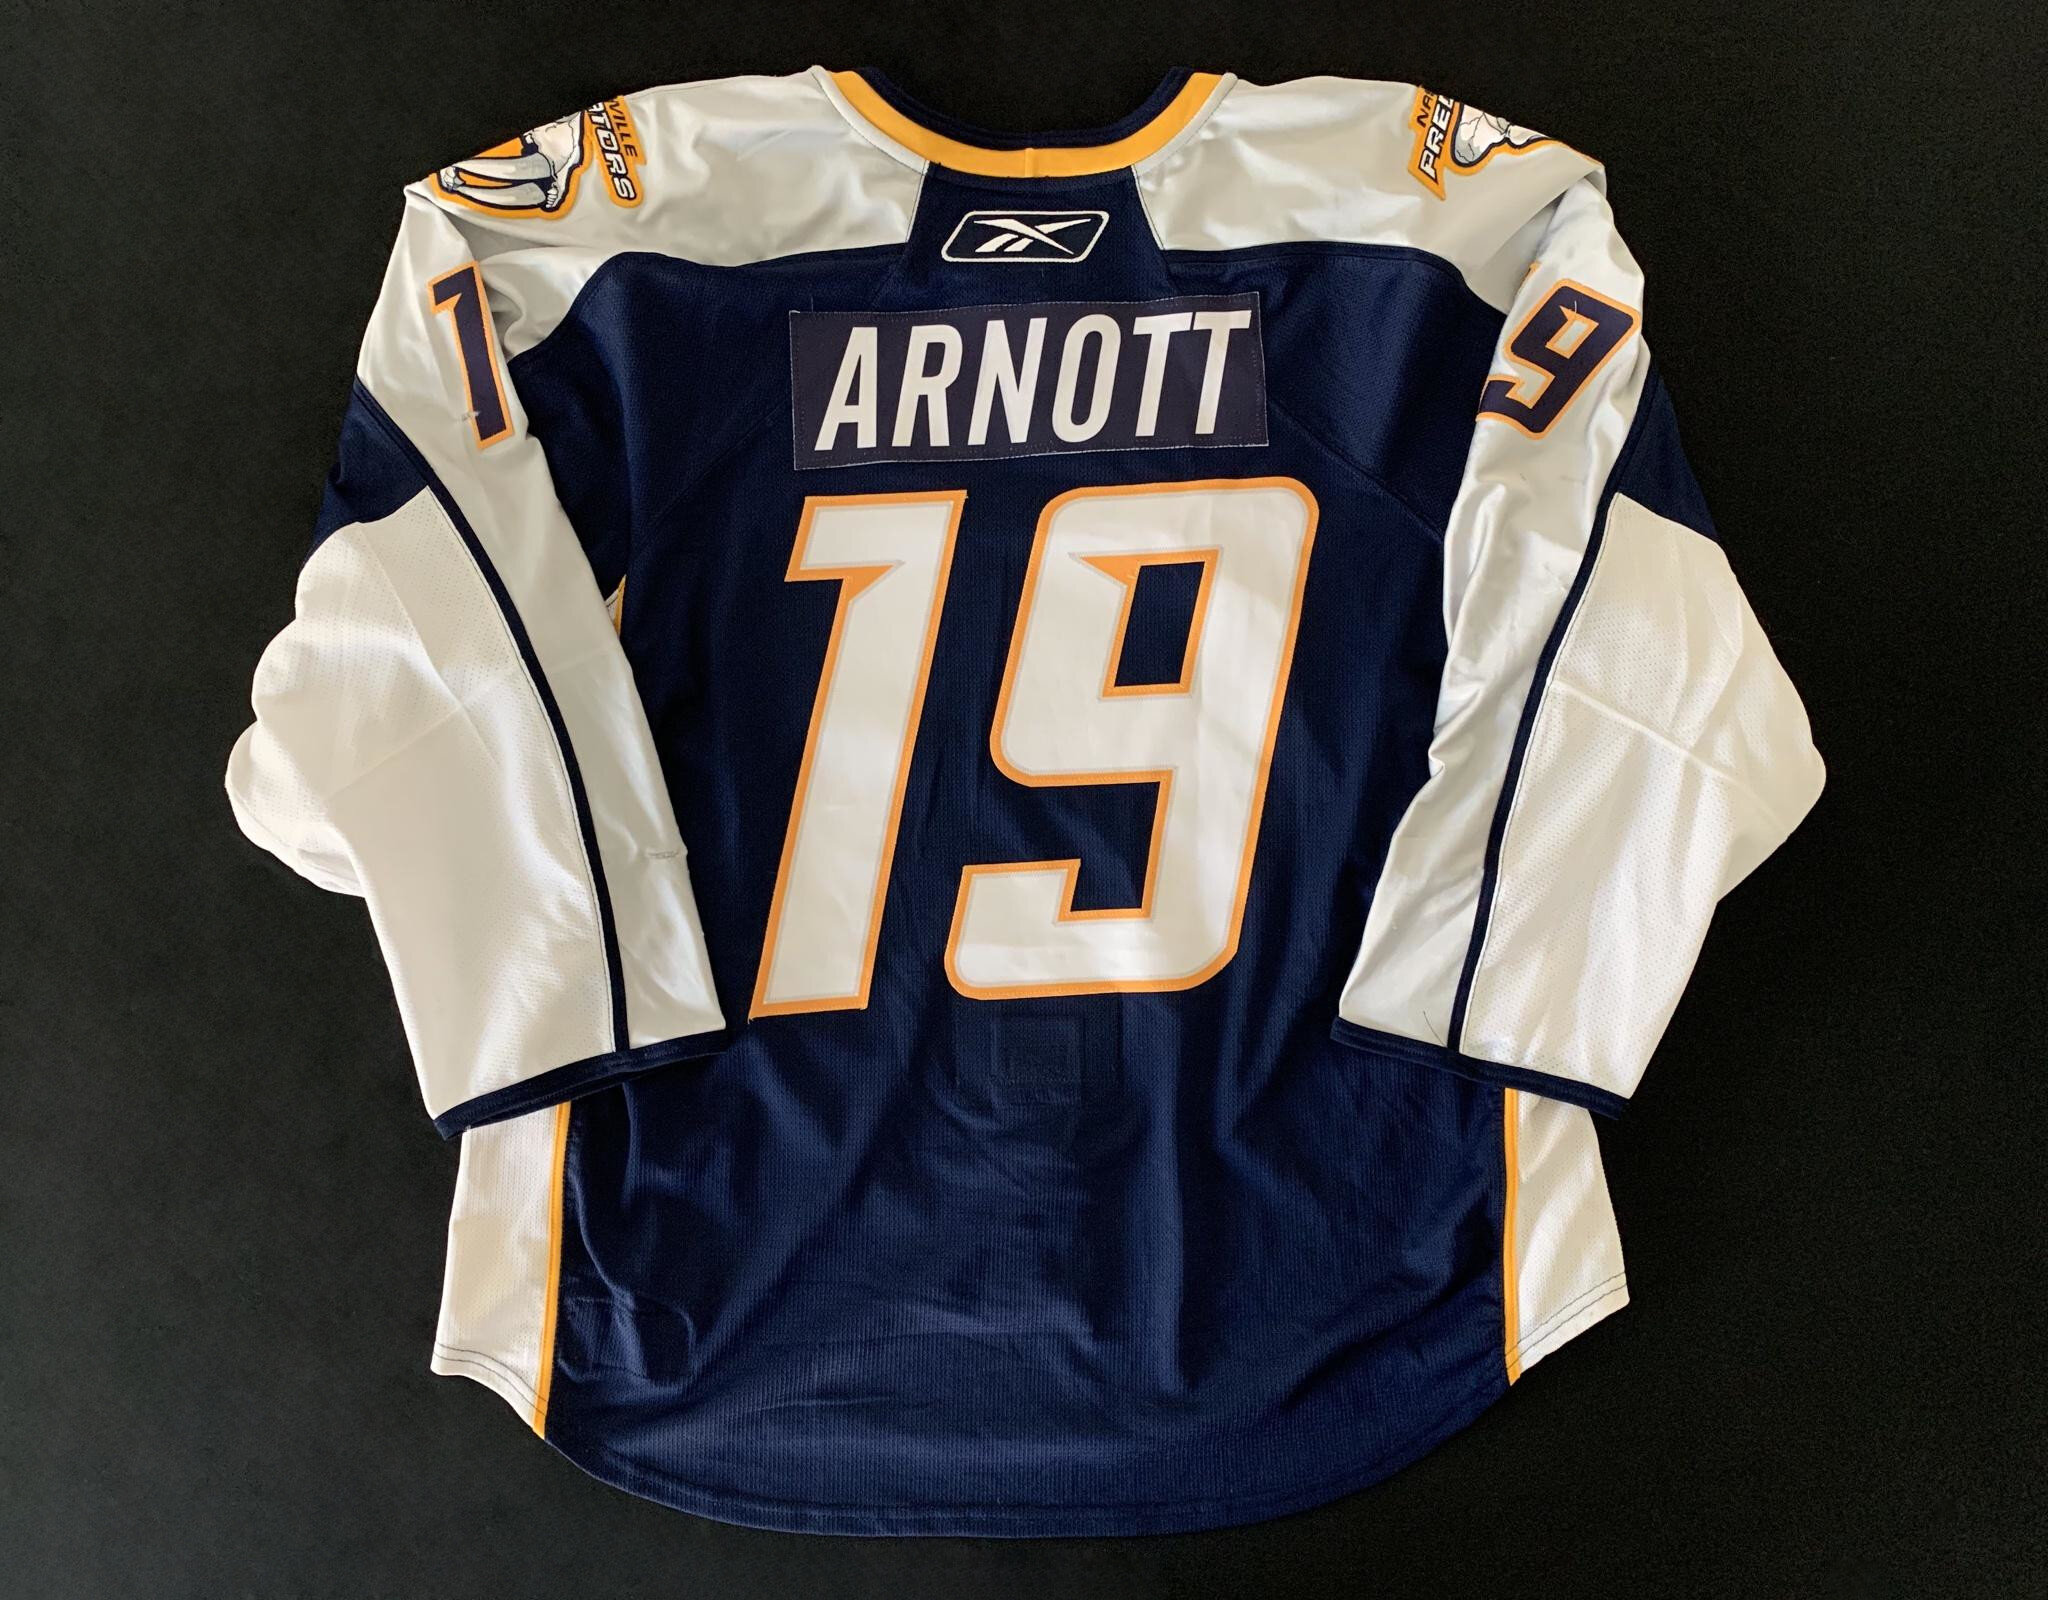 Should this be our home and away jersey set? : r/Predators